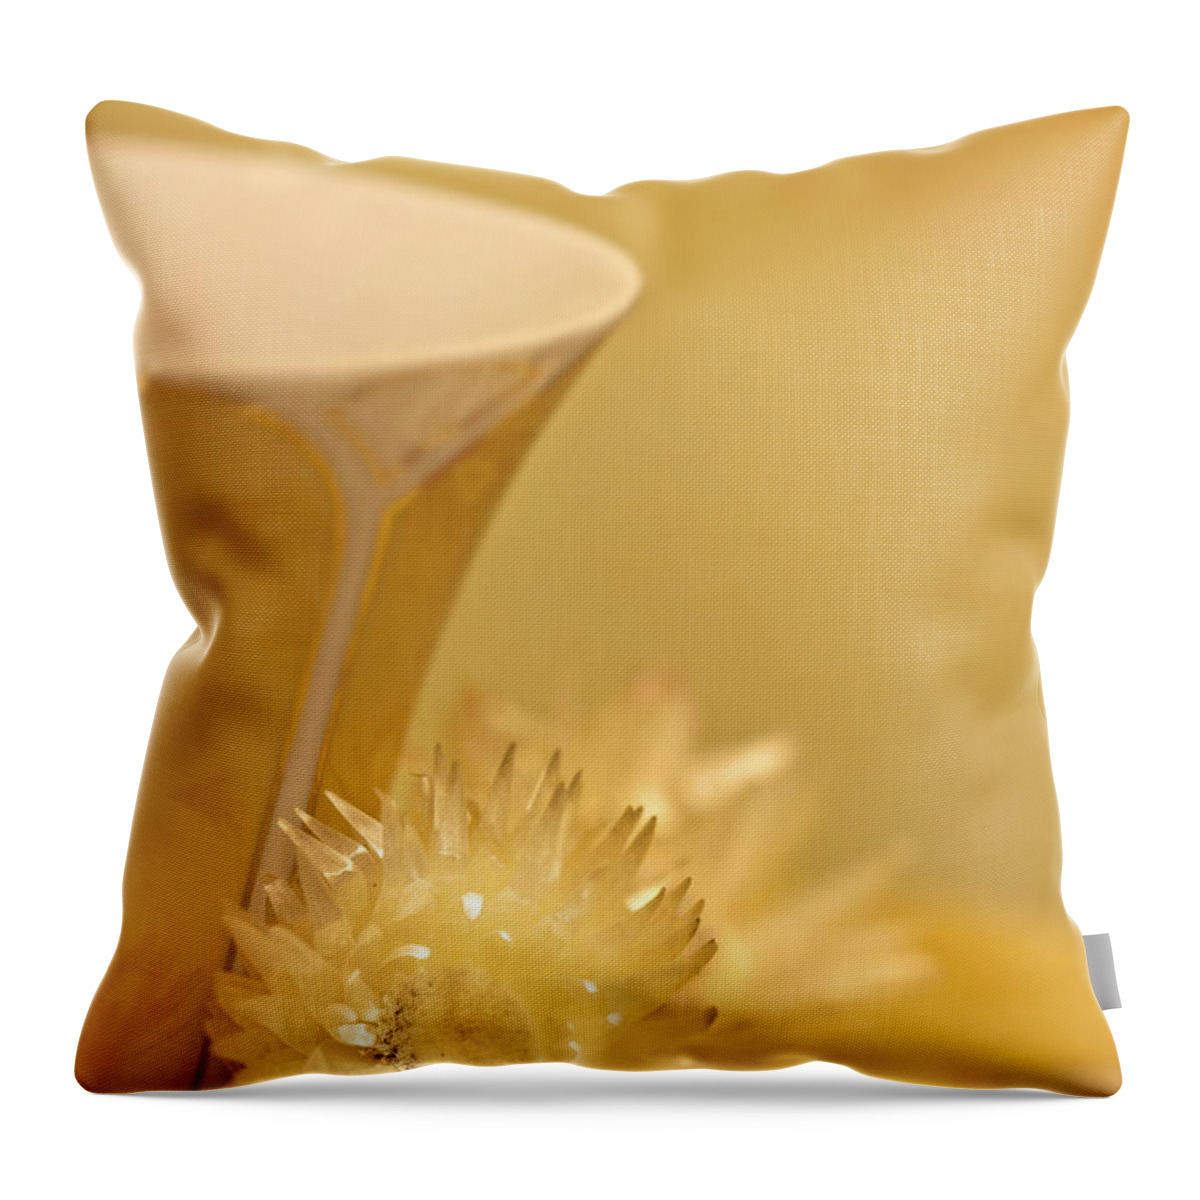 Cup Throw Pillow featuring the photograph Soothing by Evelina Kremsdorf